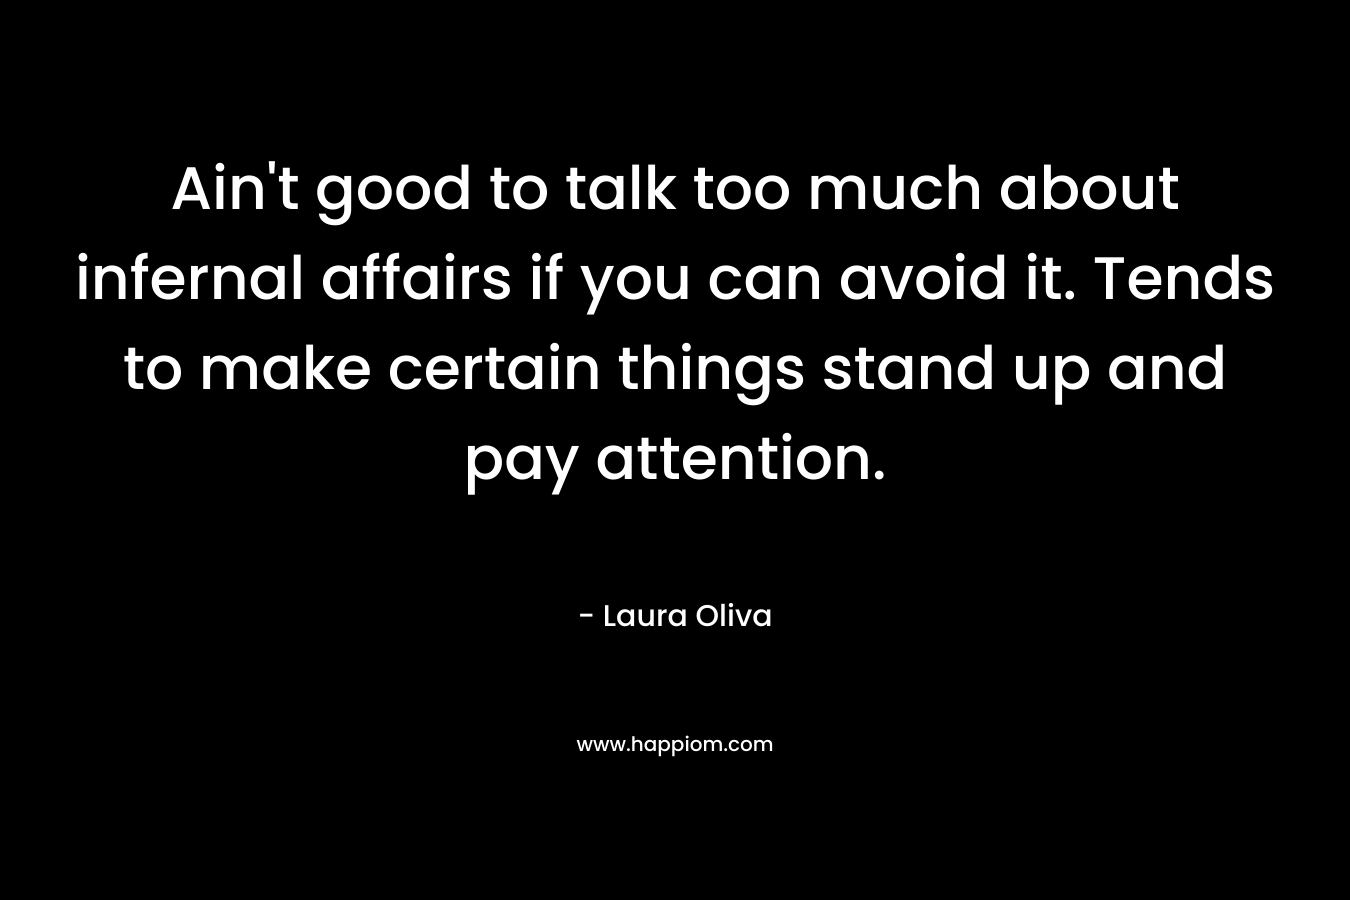 Ain’t good to talk too much about infernal affairs if you can avoid it. Tends to make certain things stand up and pay attention. – Laura  Oliva